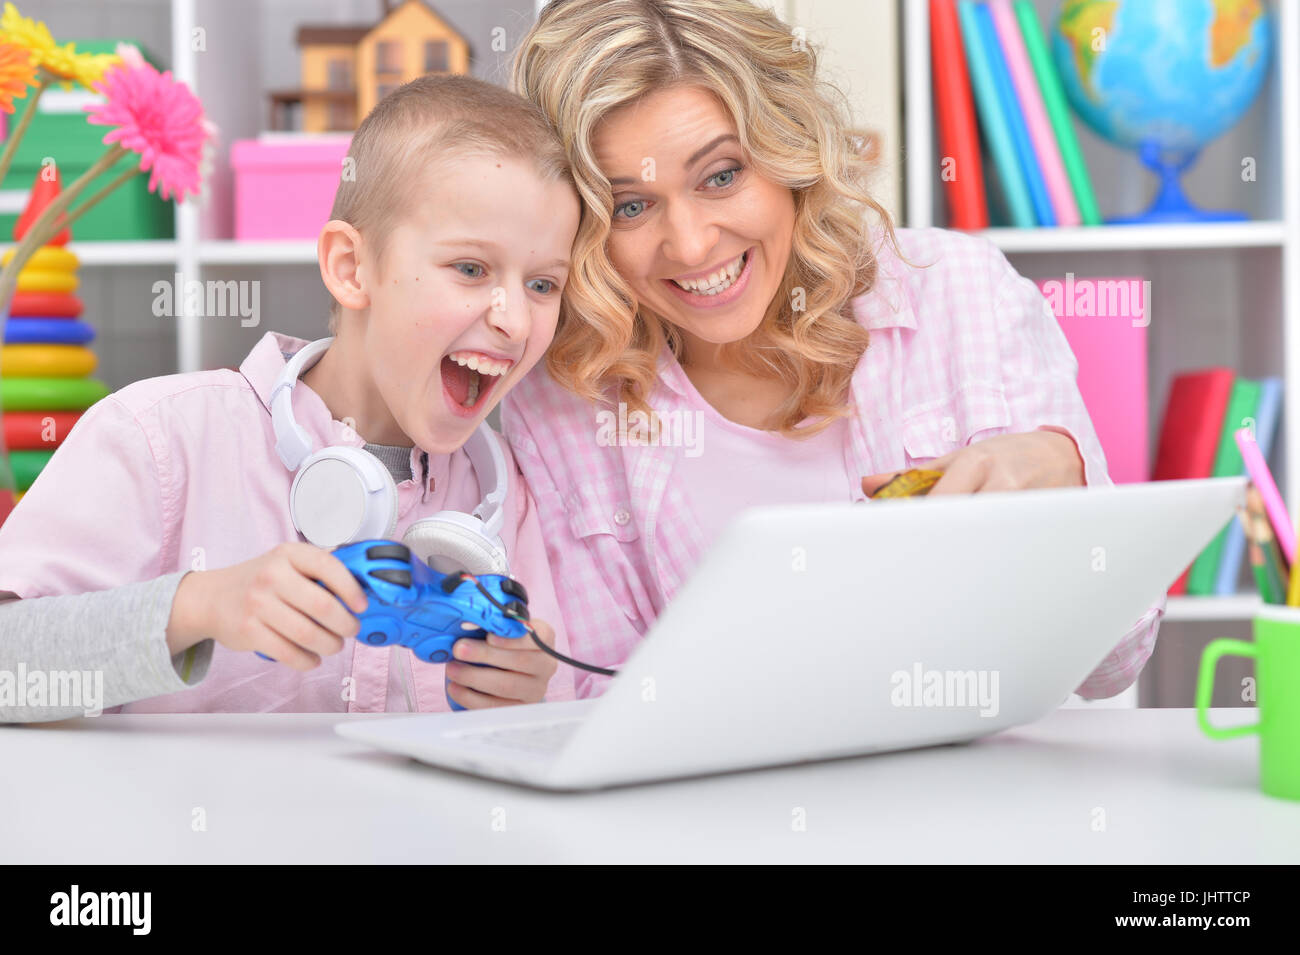 Mother and son playing game Stock Photo